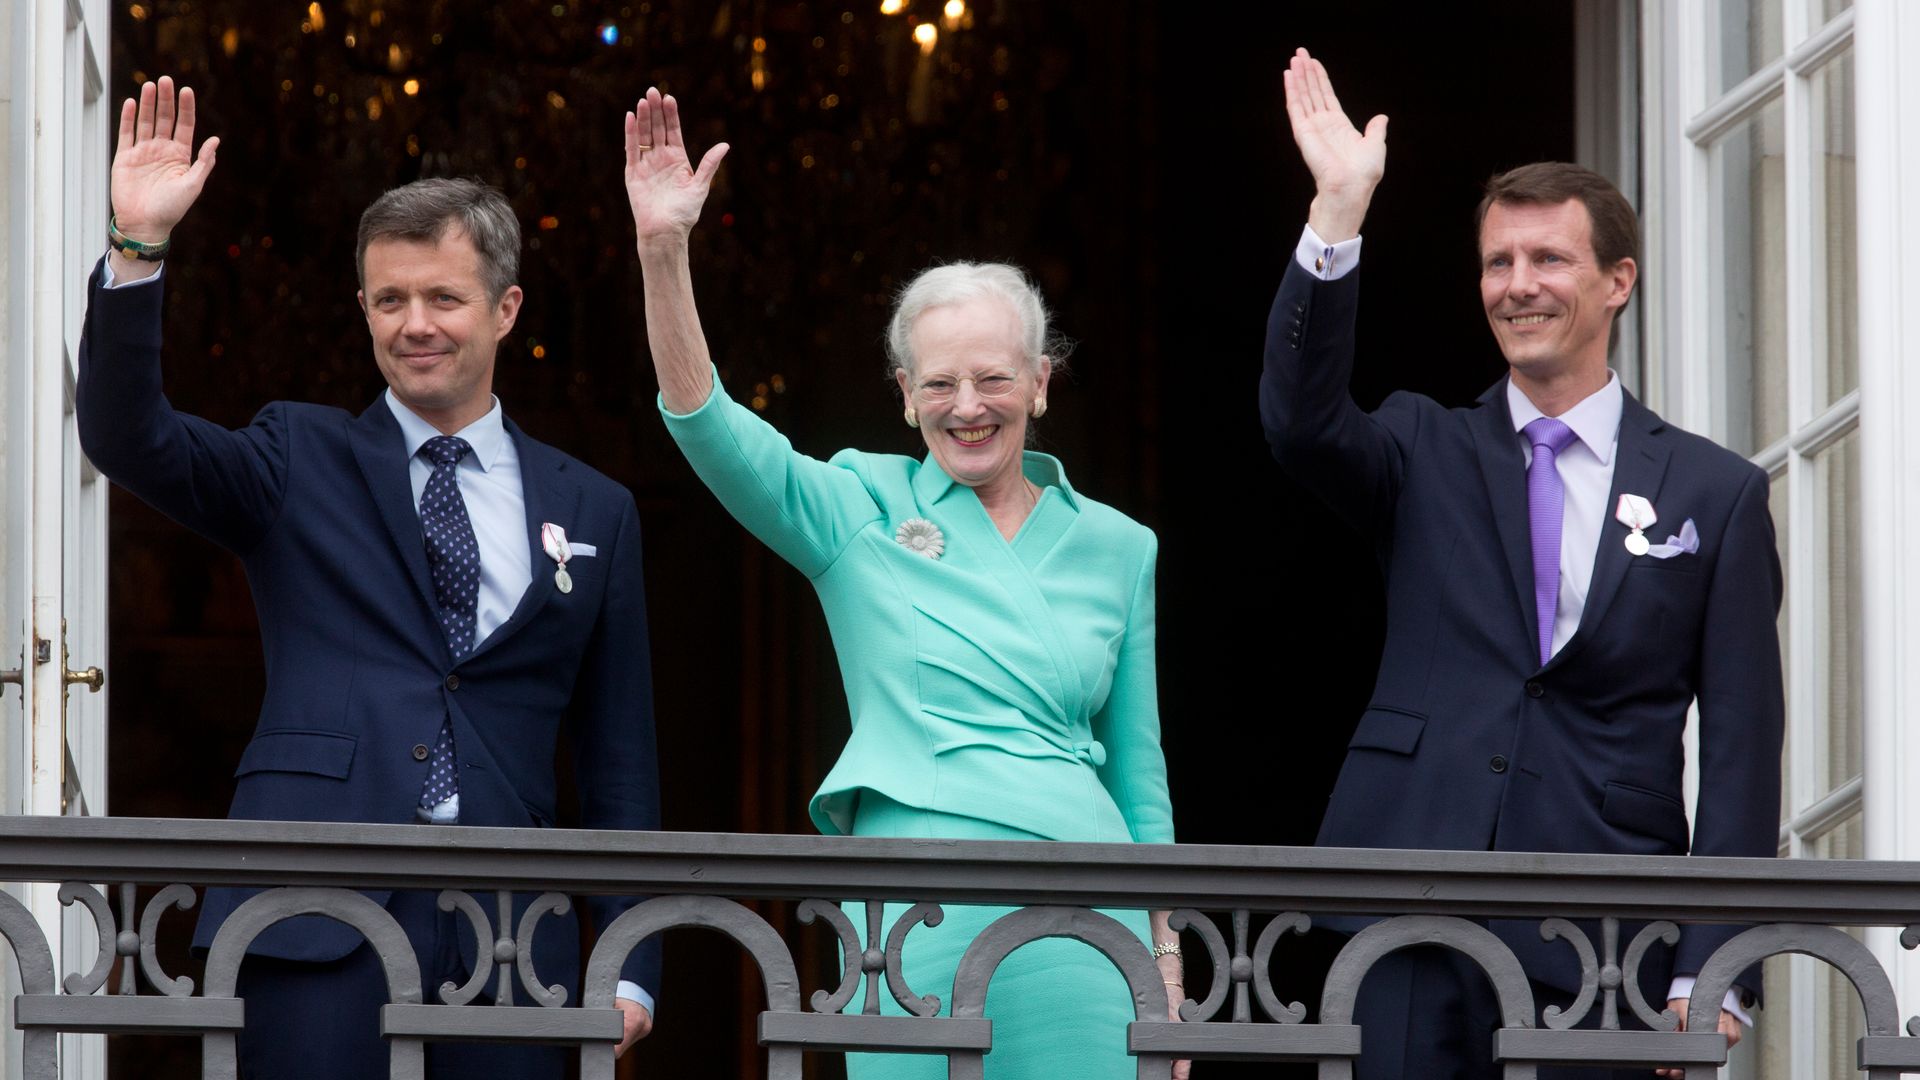 Queen Margrethe of Denmark with her two sons, Frederik and Joachim